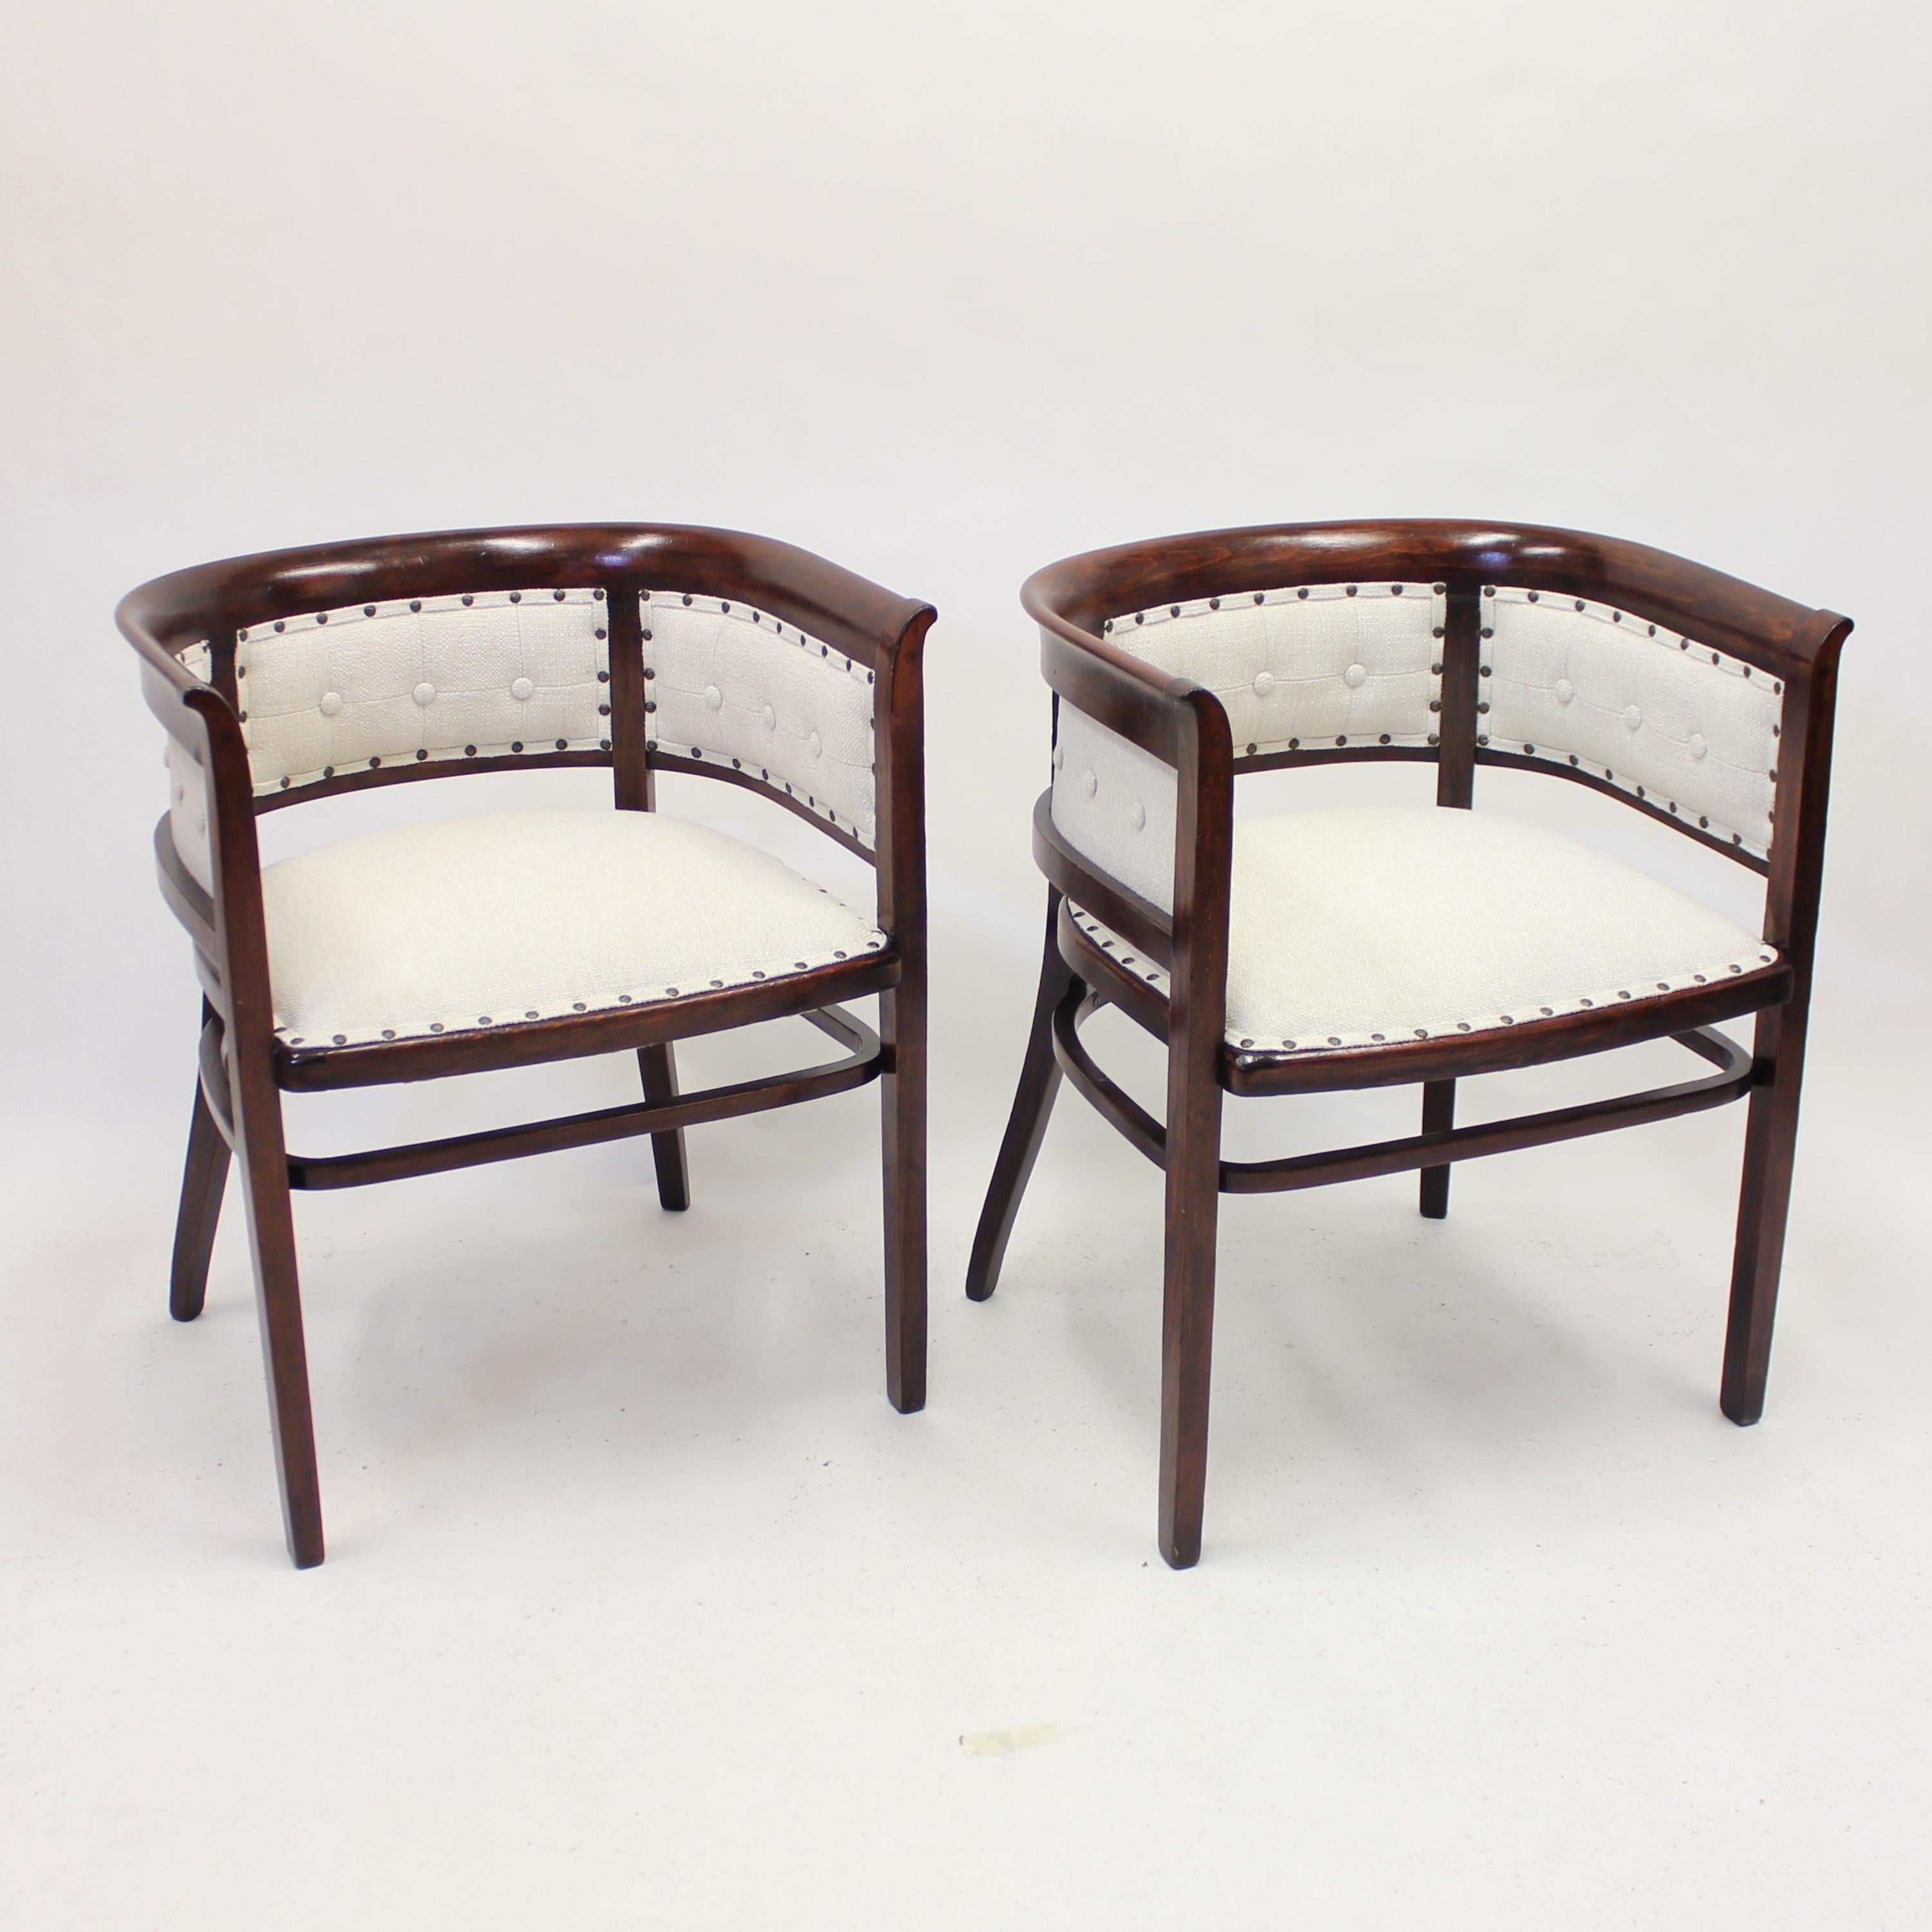 Czech Pair of Fischel Armchairs, in the Style of Josef Hoffmann, Early 20th Century For Sale